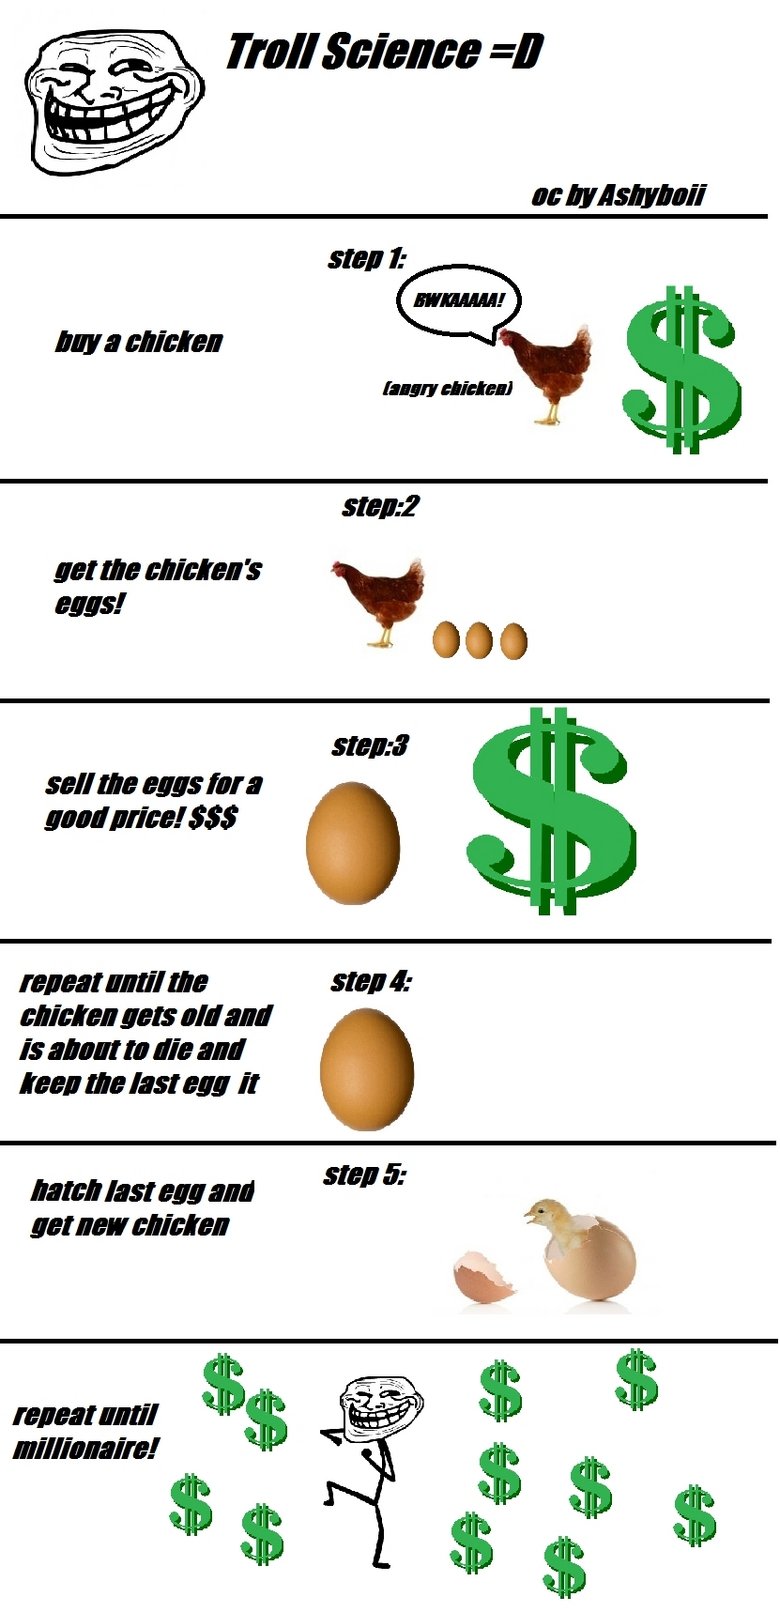 troll science (oc). oc by me. troll science " ME chicken? Selim I renal EWING Ill Ill EFF HE ttchtt "tll if M% ttchtt "tll tittel FEE’. So you want to become an egg farmer then.